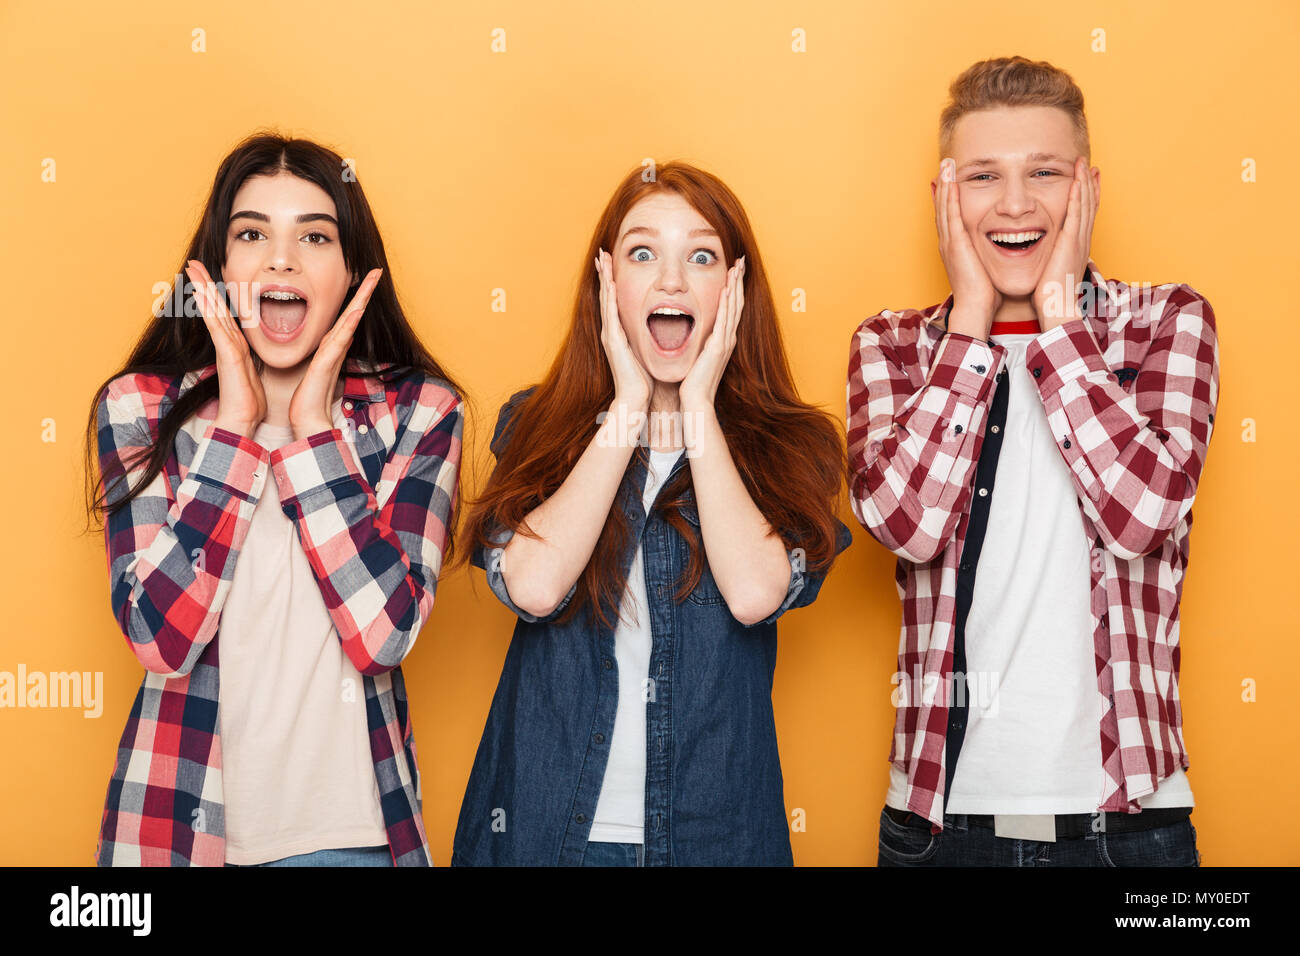 Group of happy school friends screaming while standing together over yellow background Stock Photo